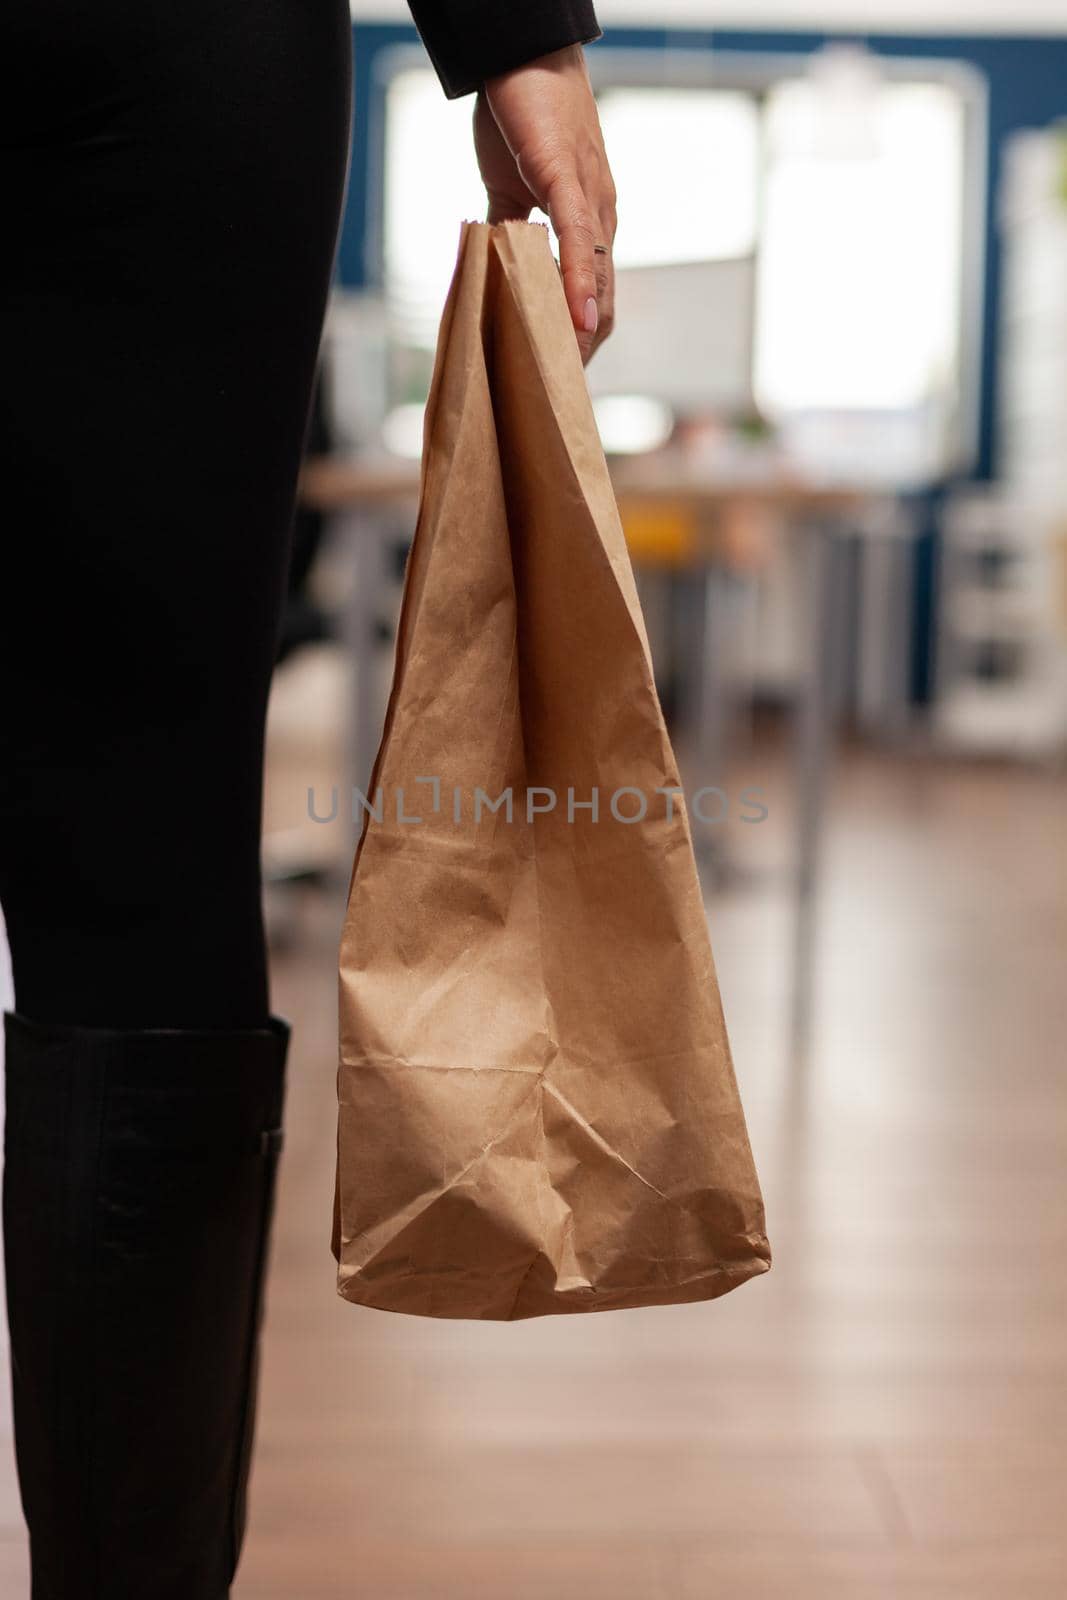 Businesswoman holding delivery takeaway food meal order paper bag during takeout lunchtime putting at desk in startup company office. Entrepreneur woman having lunch service while working at strategy